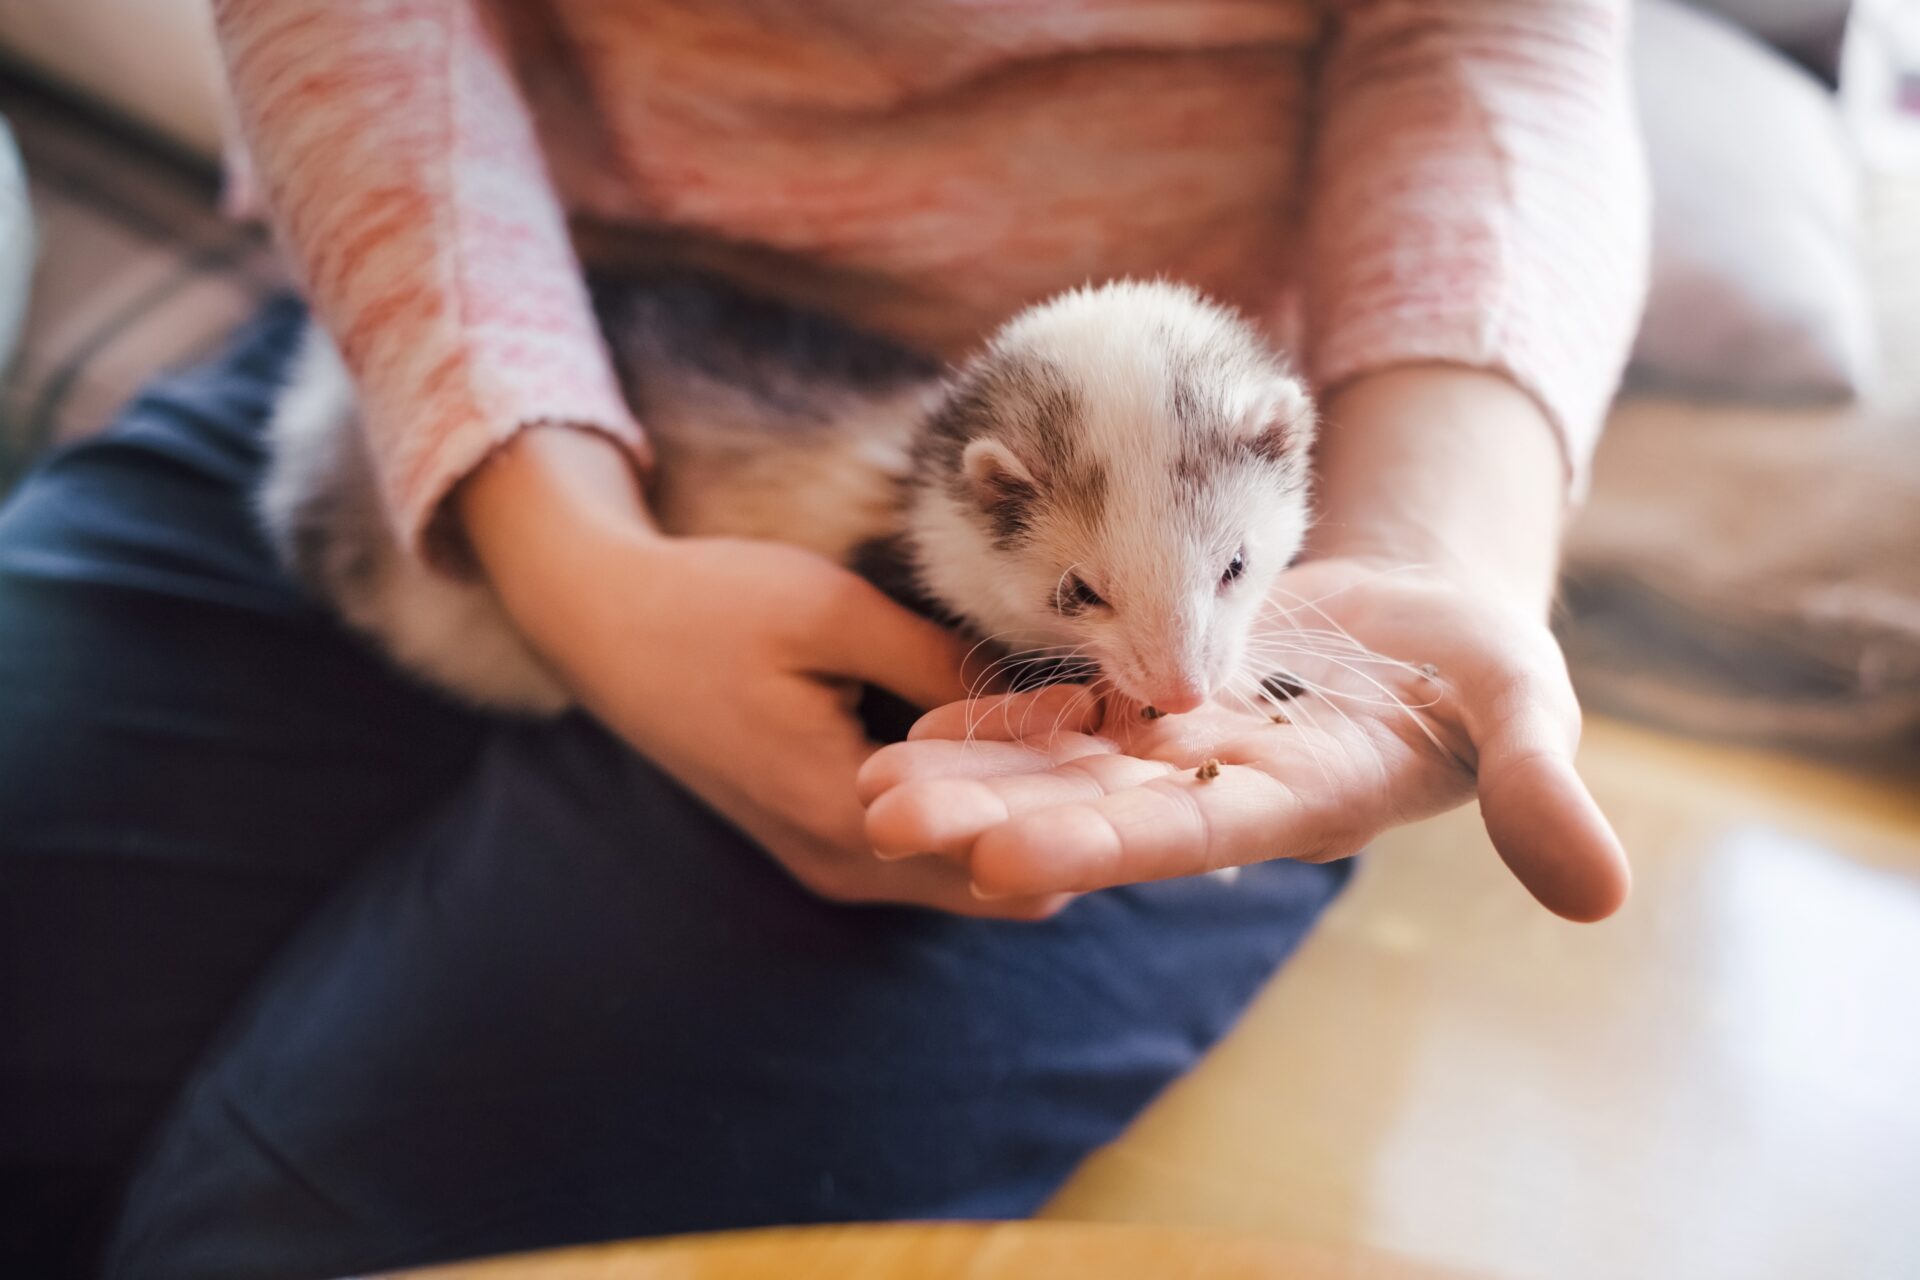 Pet ferret eating from the hand of its owner